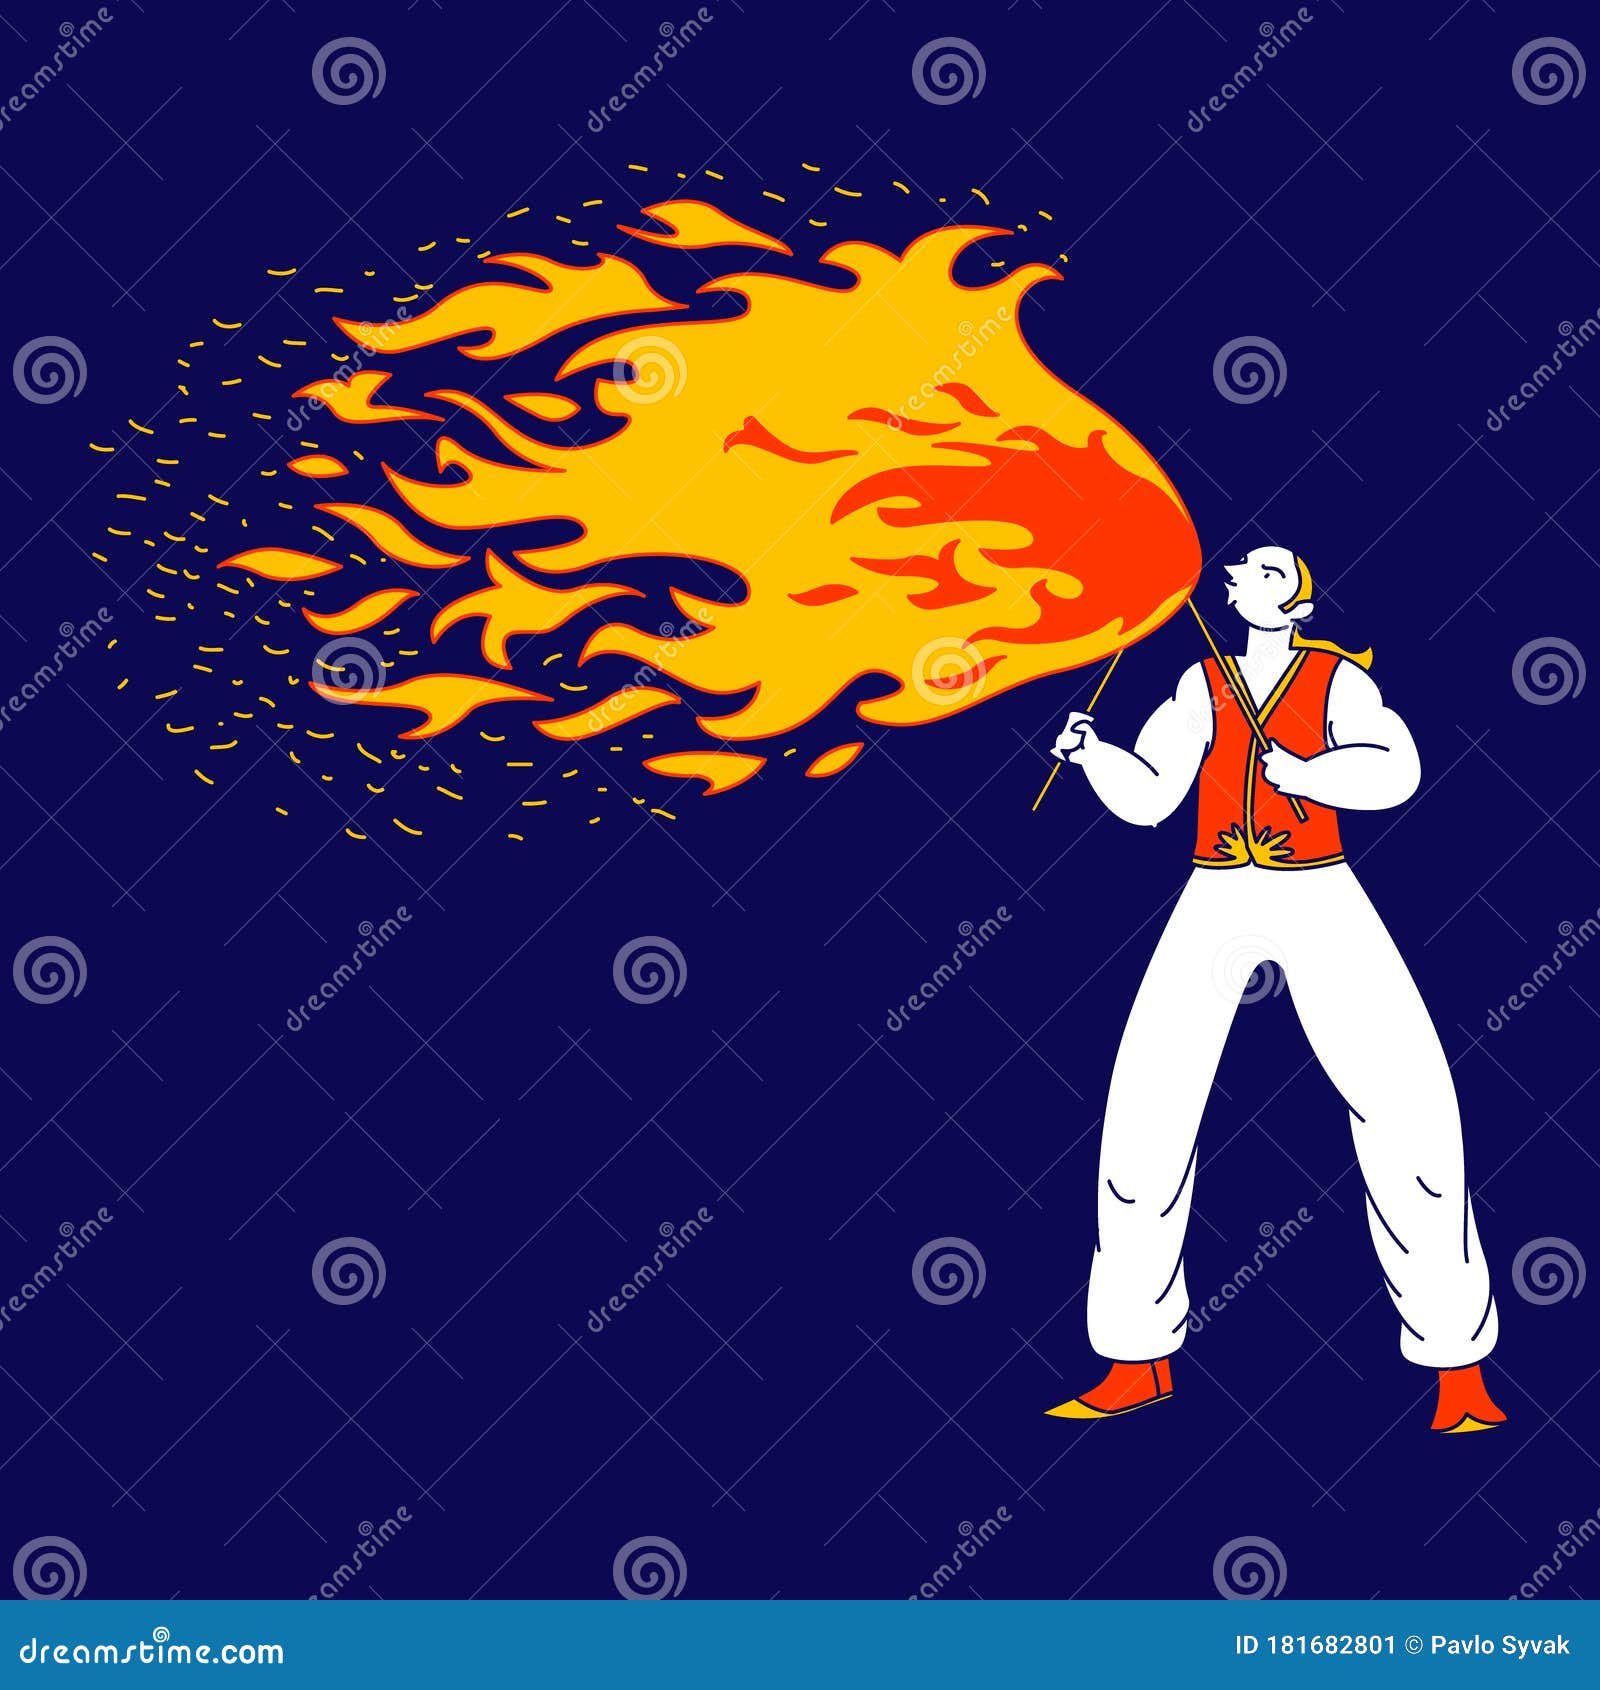 young man fakir character dancing and juggling with fire on stage performing talent show program